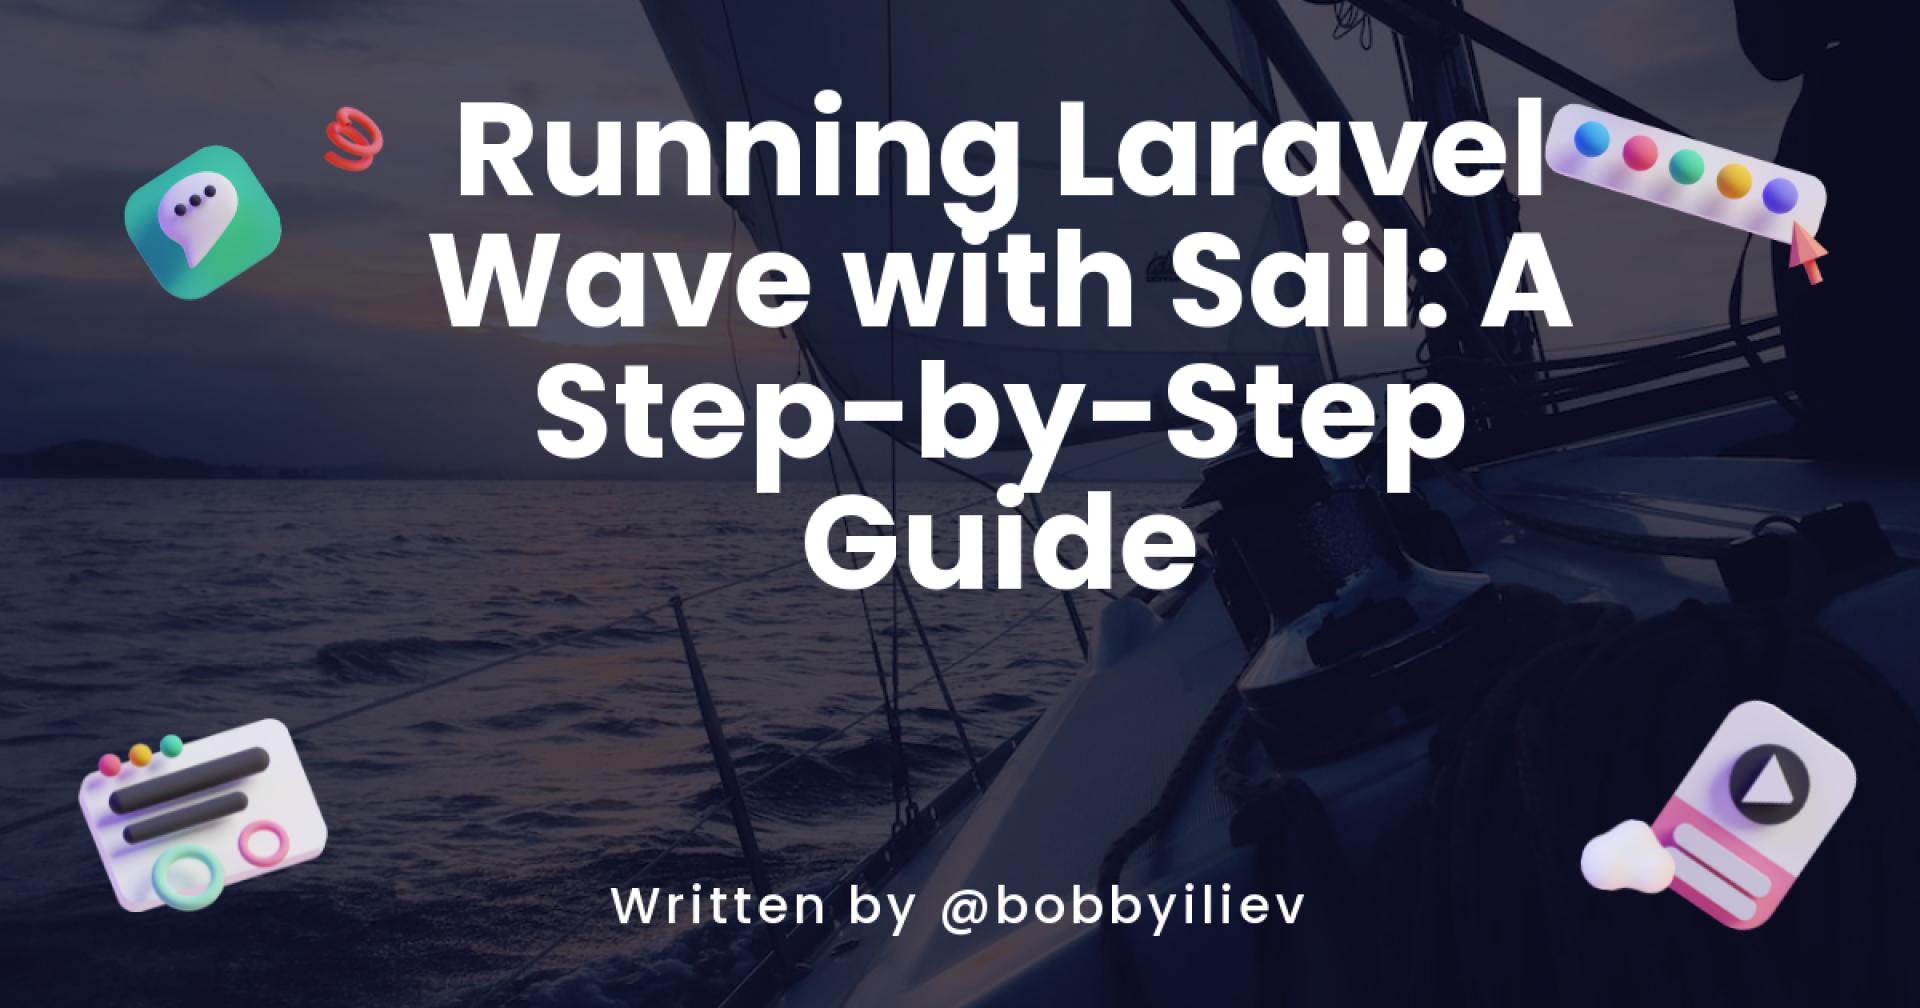 Running Laravel Wave with Sail: A Step-by-Step Guide